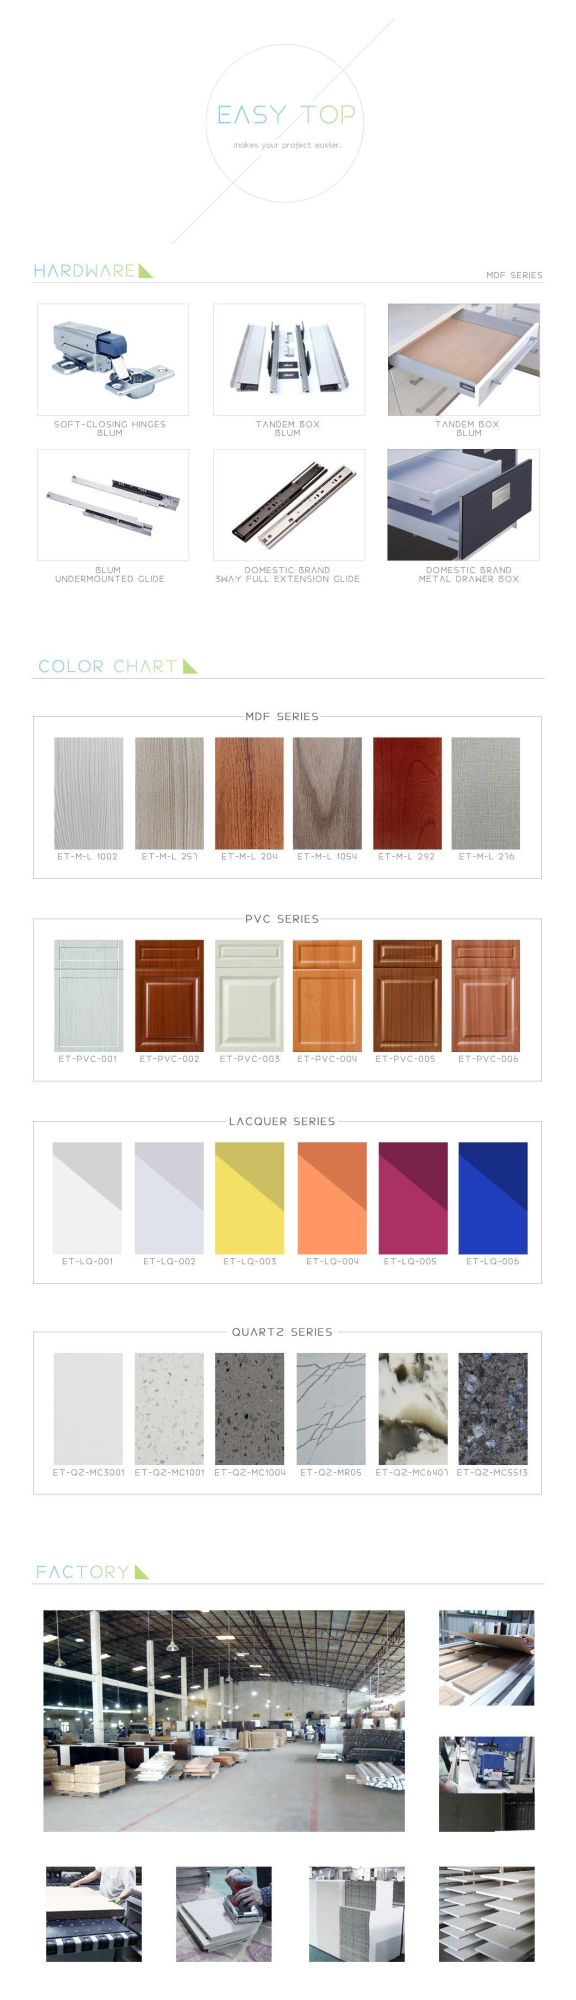 Cheap Price PVC Melamine Ready to Assemble Rta Wooden Kitchen Cabinets